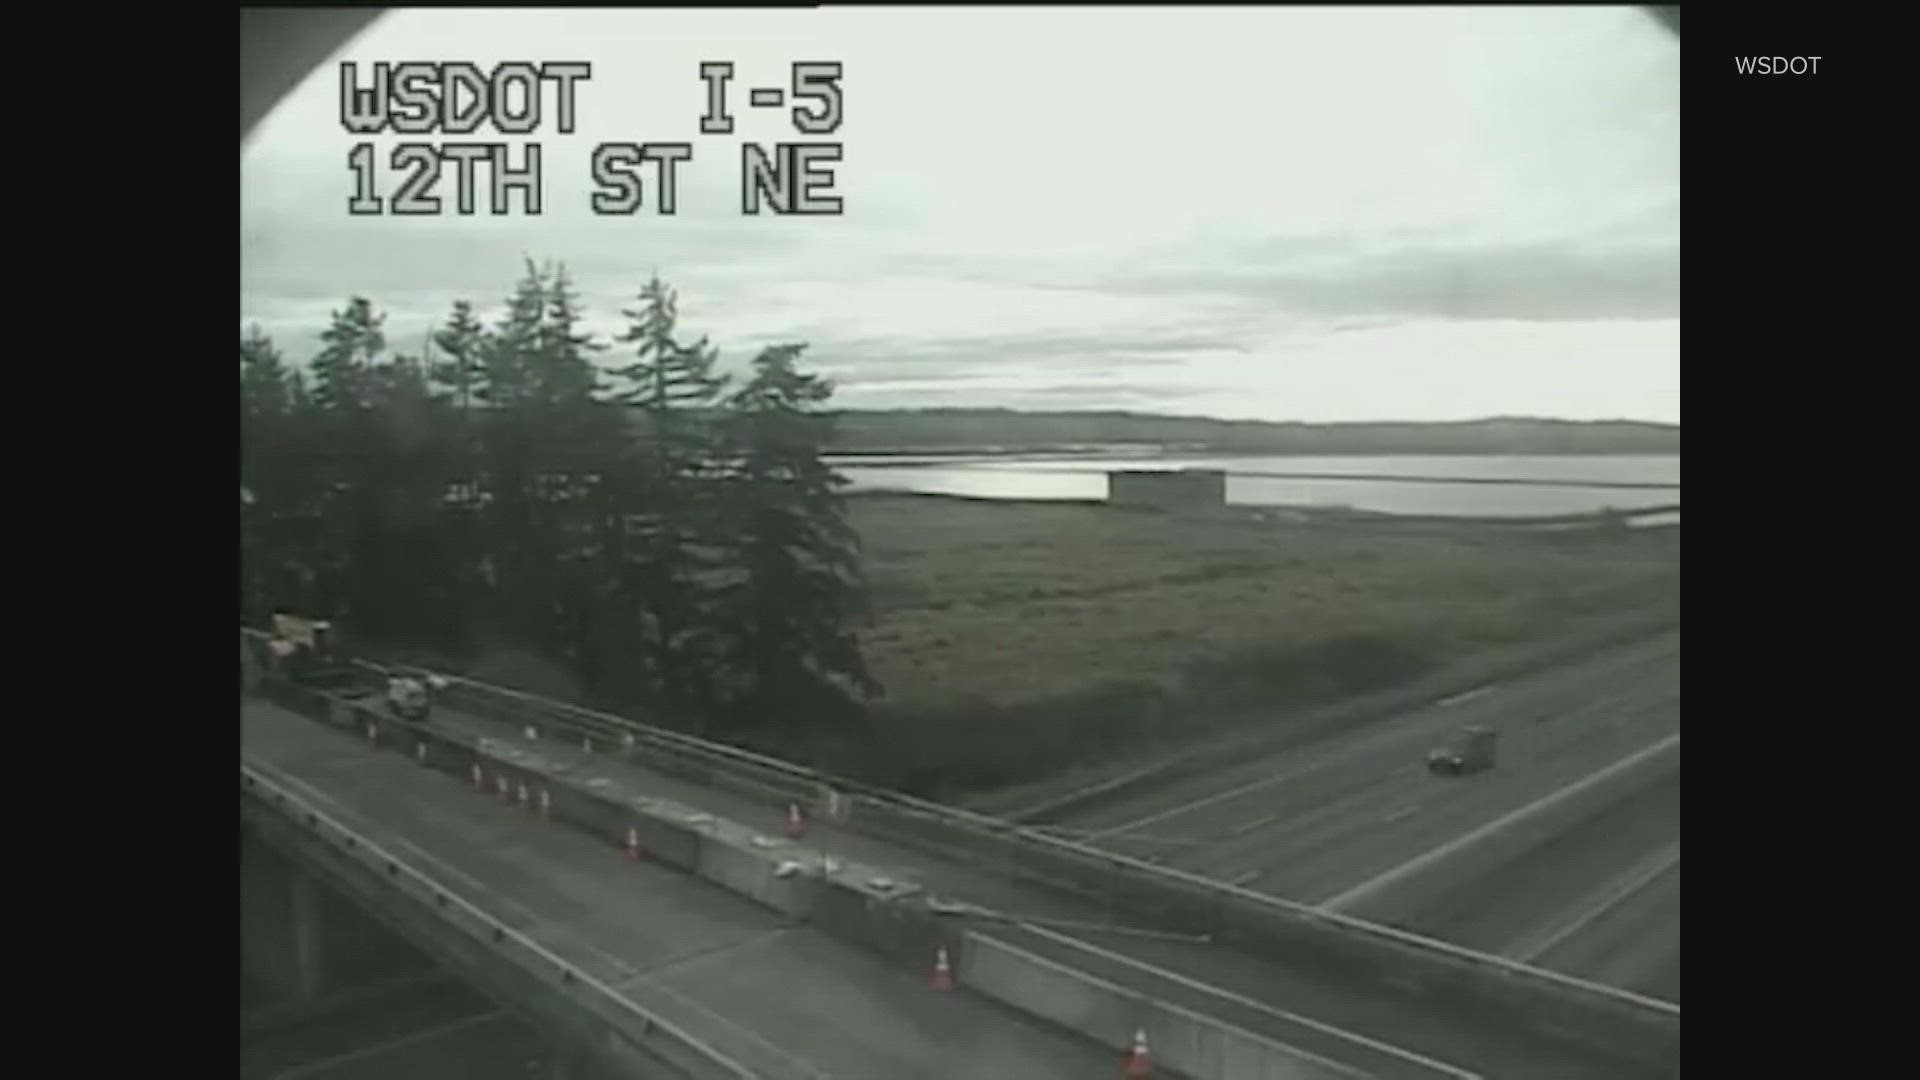 WSDOT said there will also be 30 one or two-lane closures in both directions of I-5 and shoulder closures throughout the repair work.